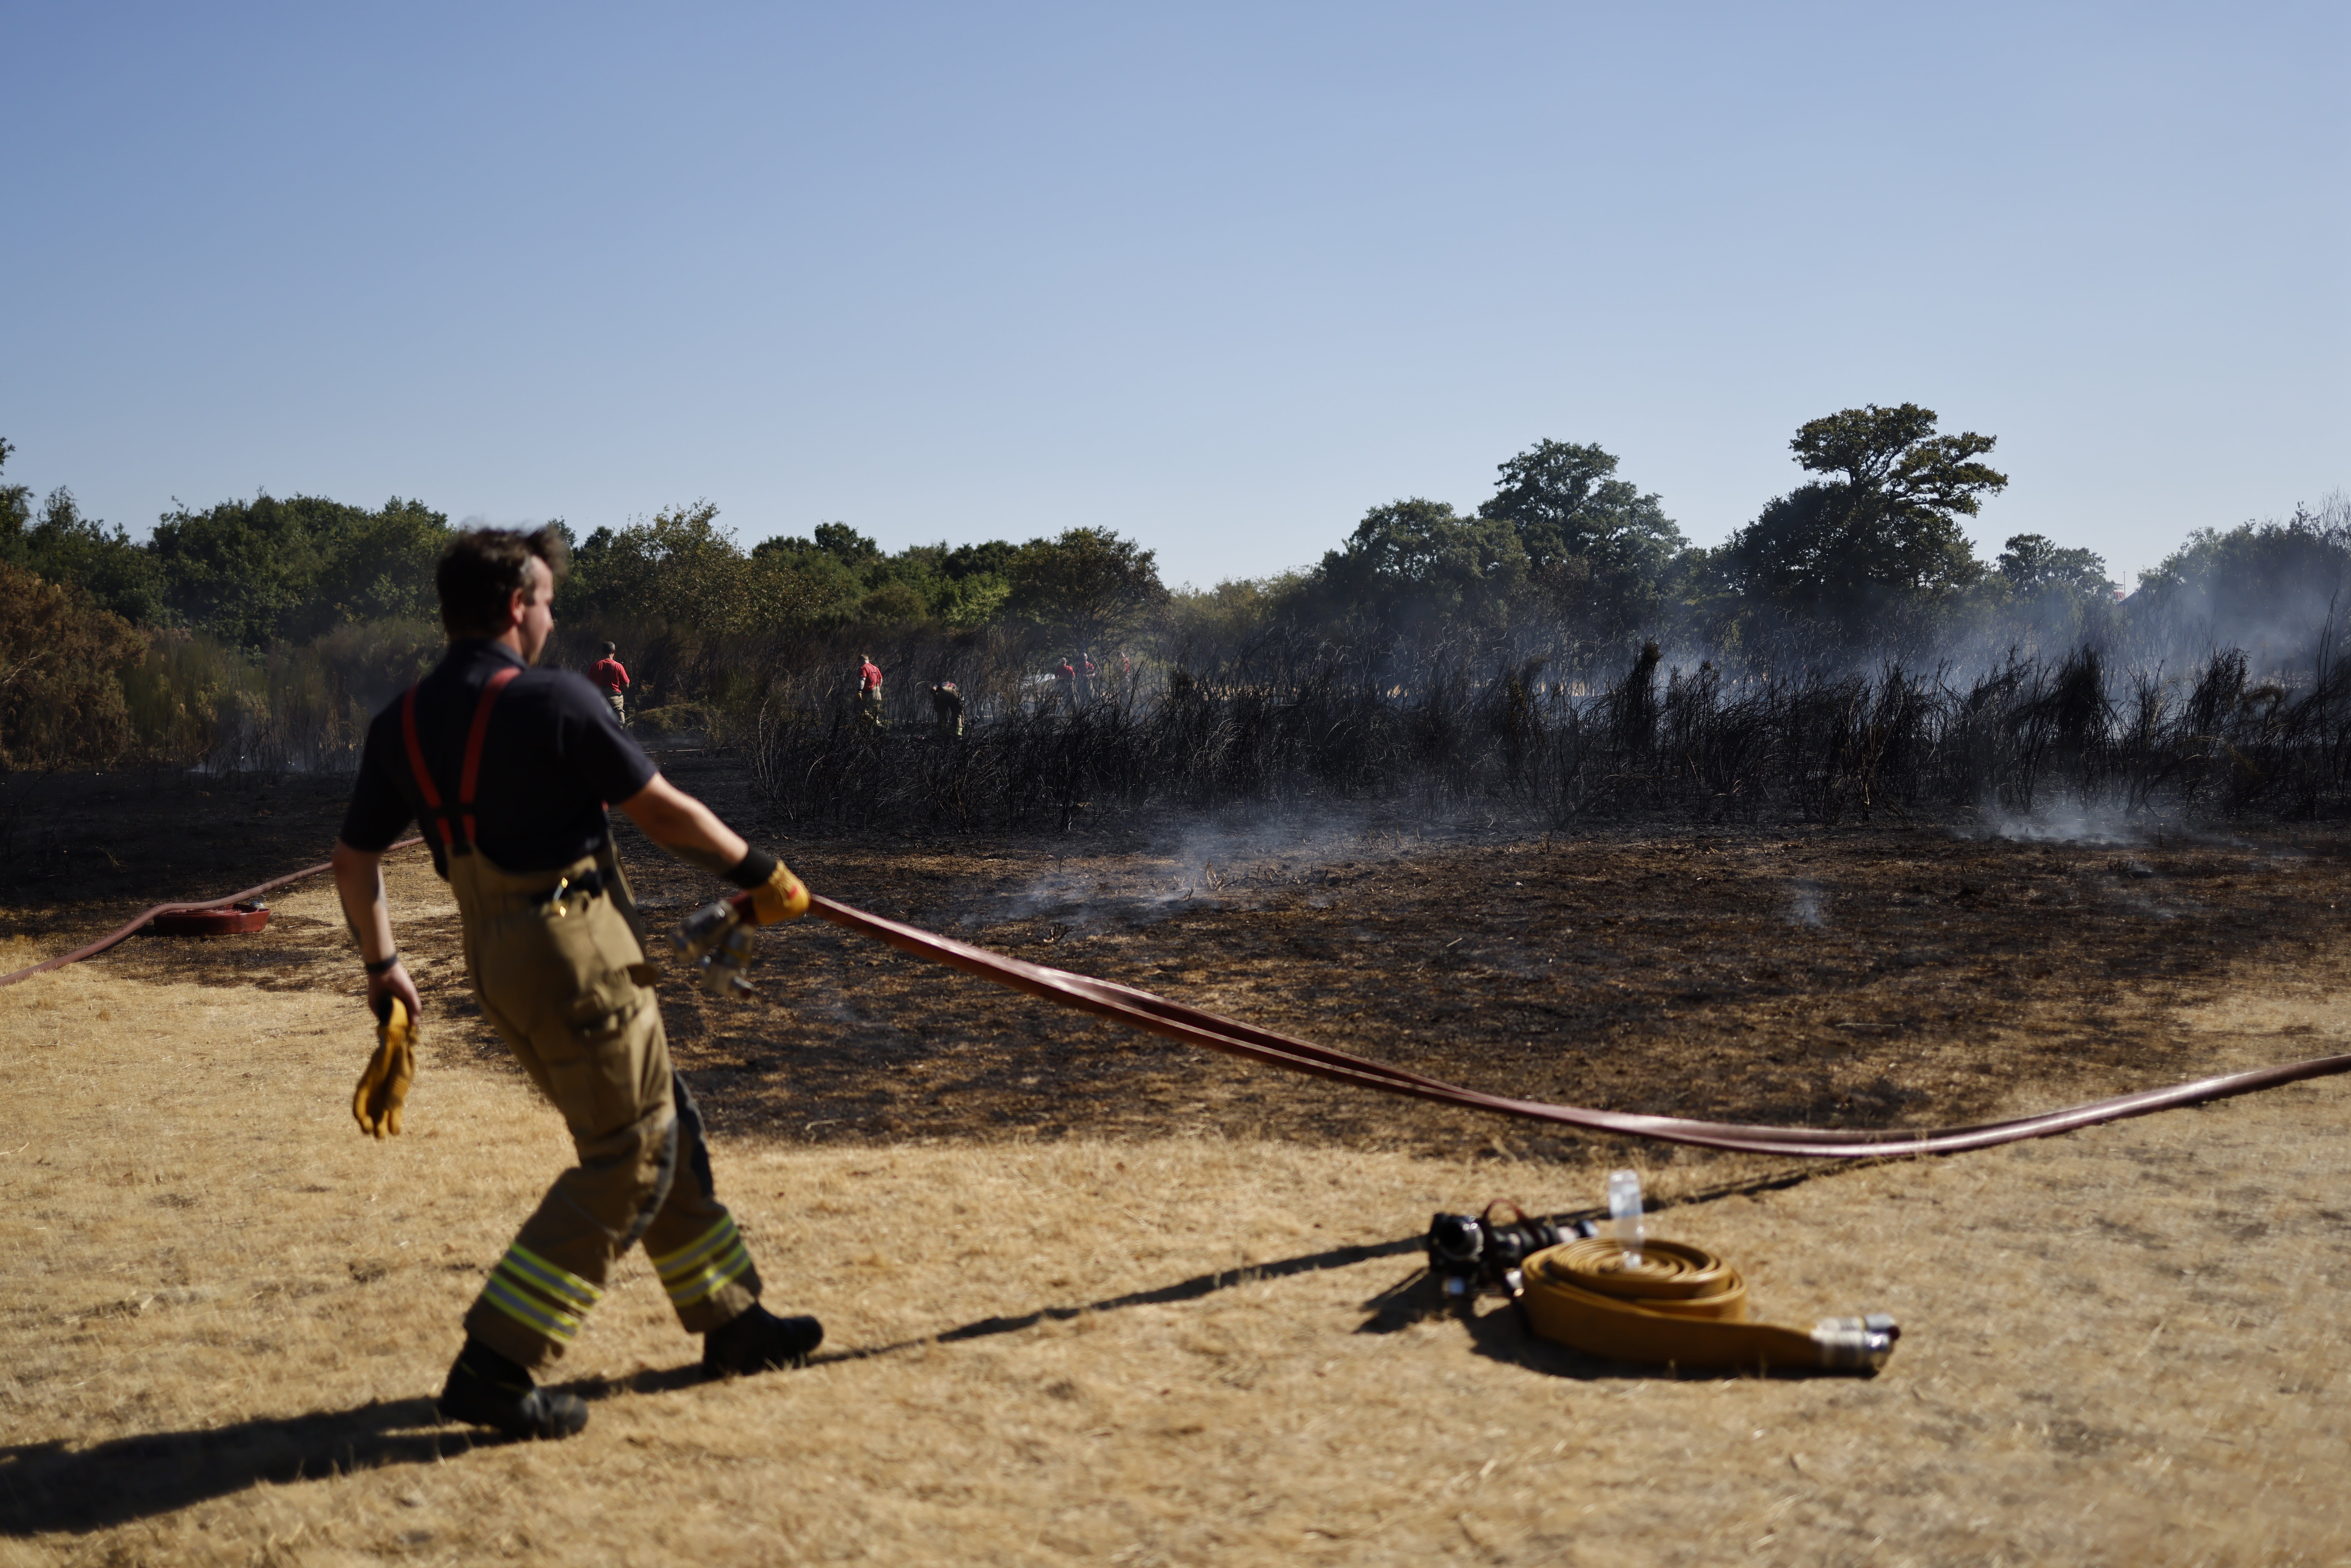 Fires have broken out during the recent scorching temperatures